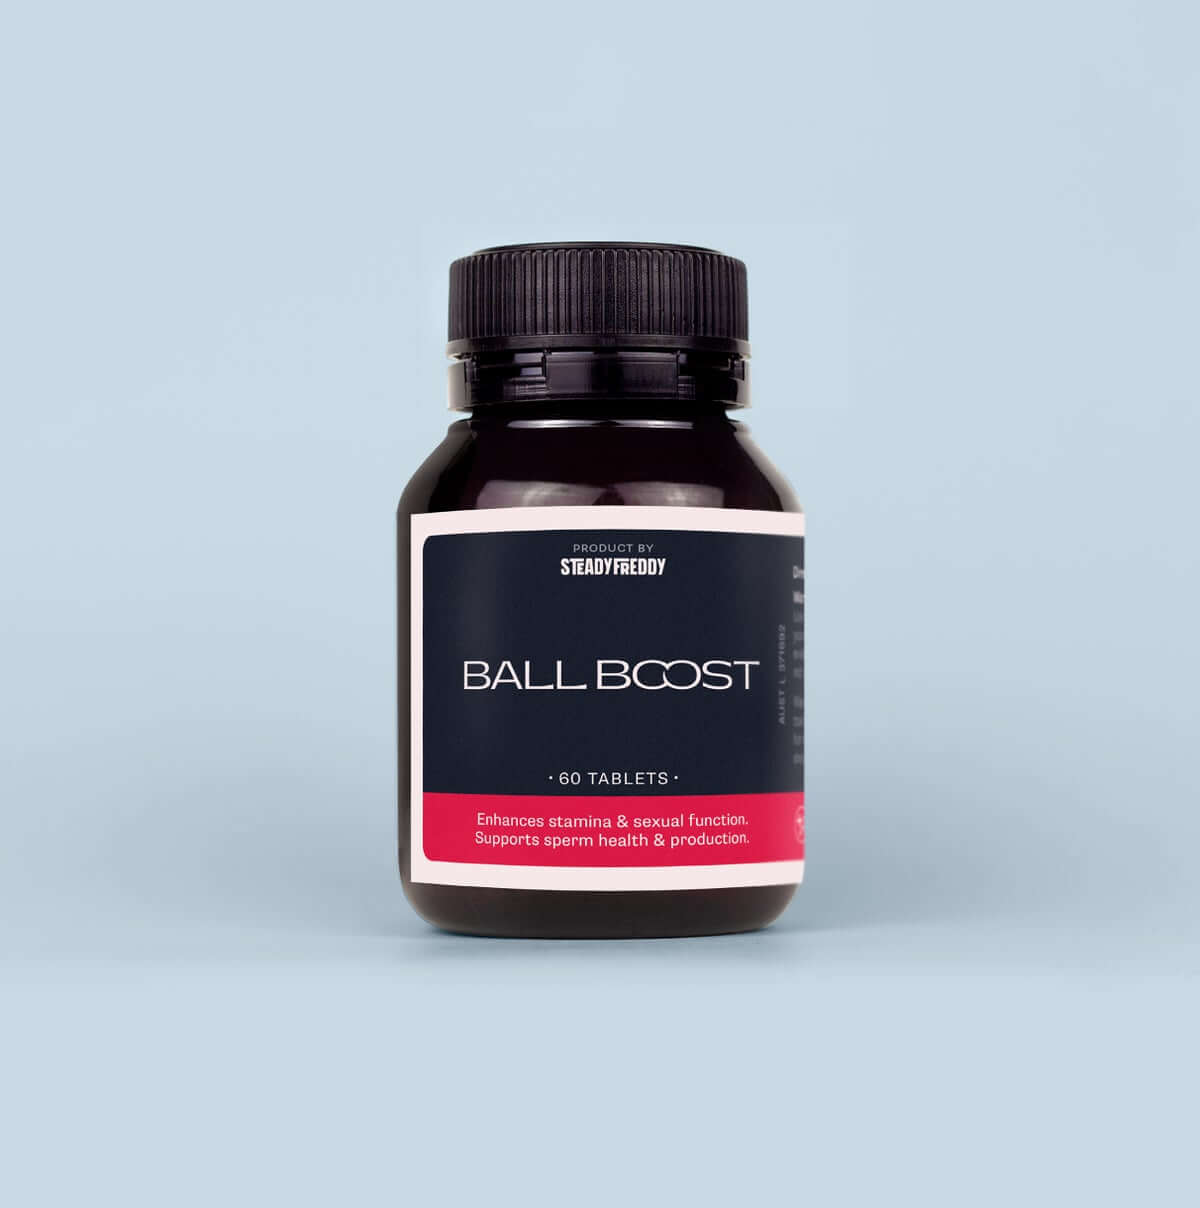 The Ball Boost® male supplement helps maintain your healthy fertility function by supporting your sperm health and its production.